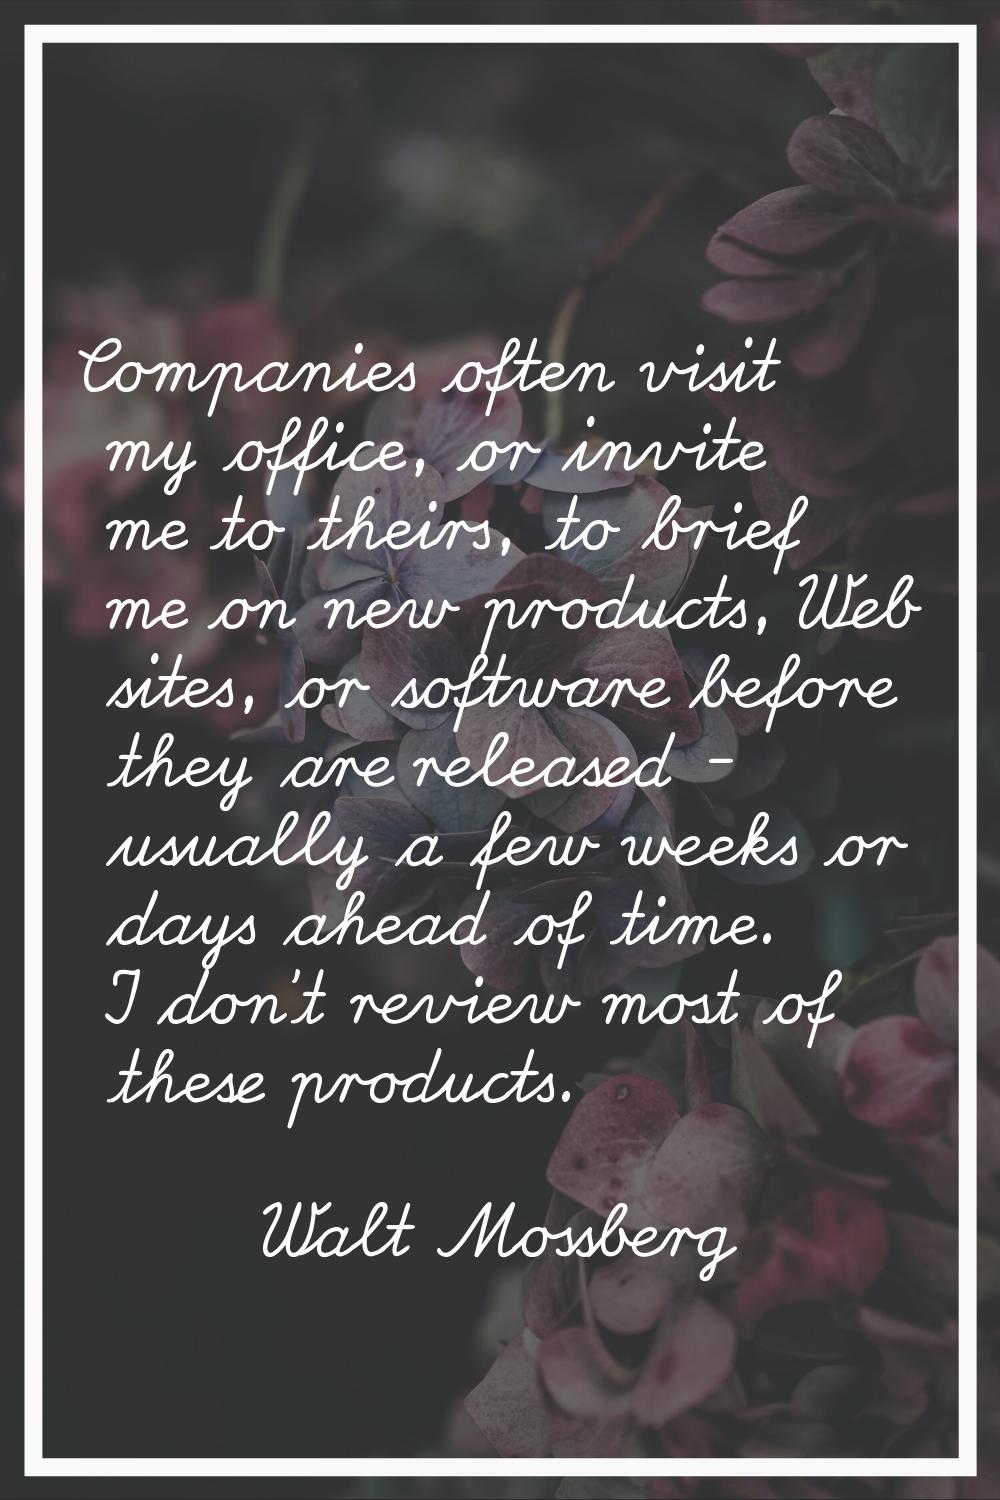 Companies often visit my office, or invite me to theirs, to brief me on new products, Web sites, or